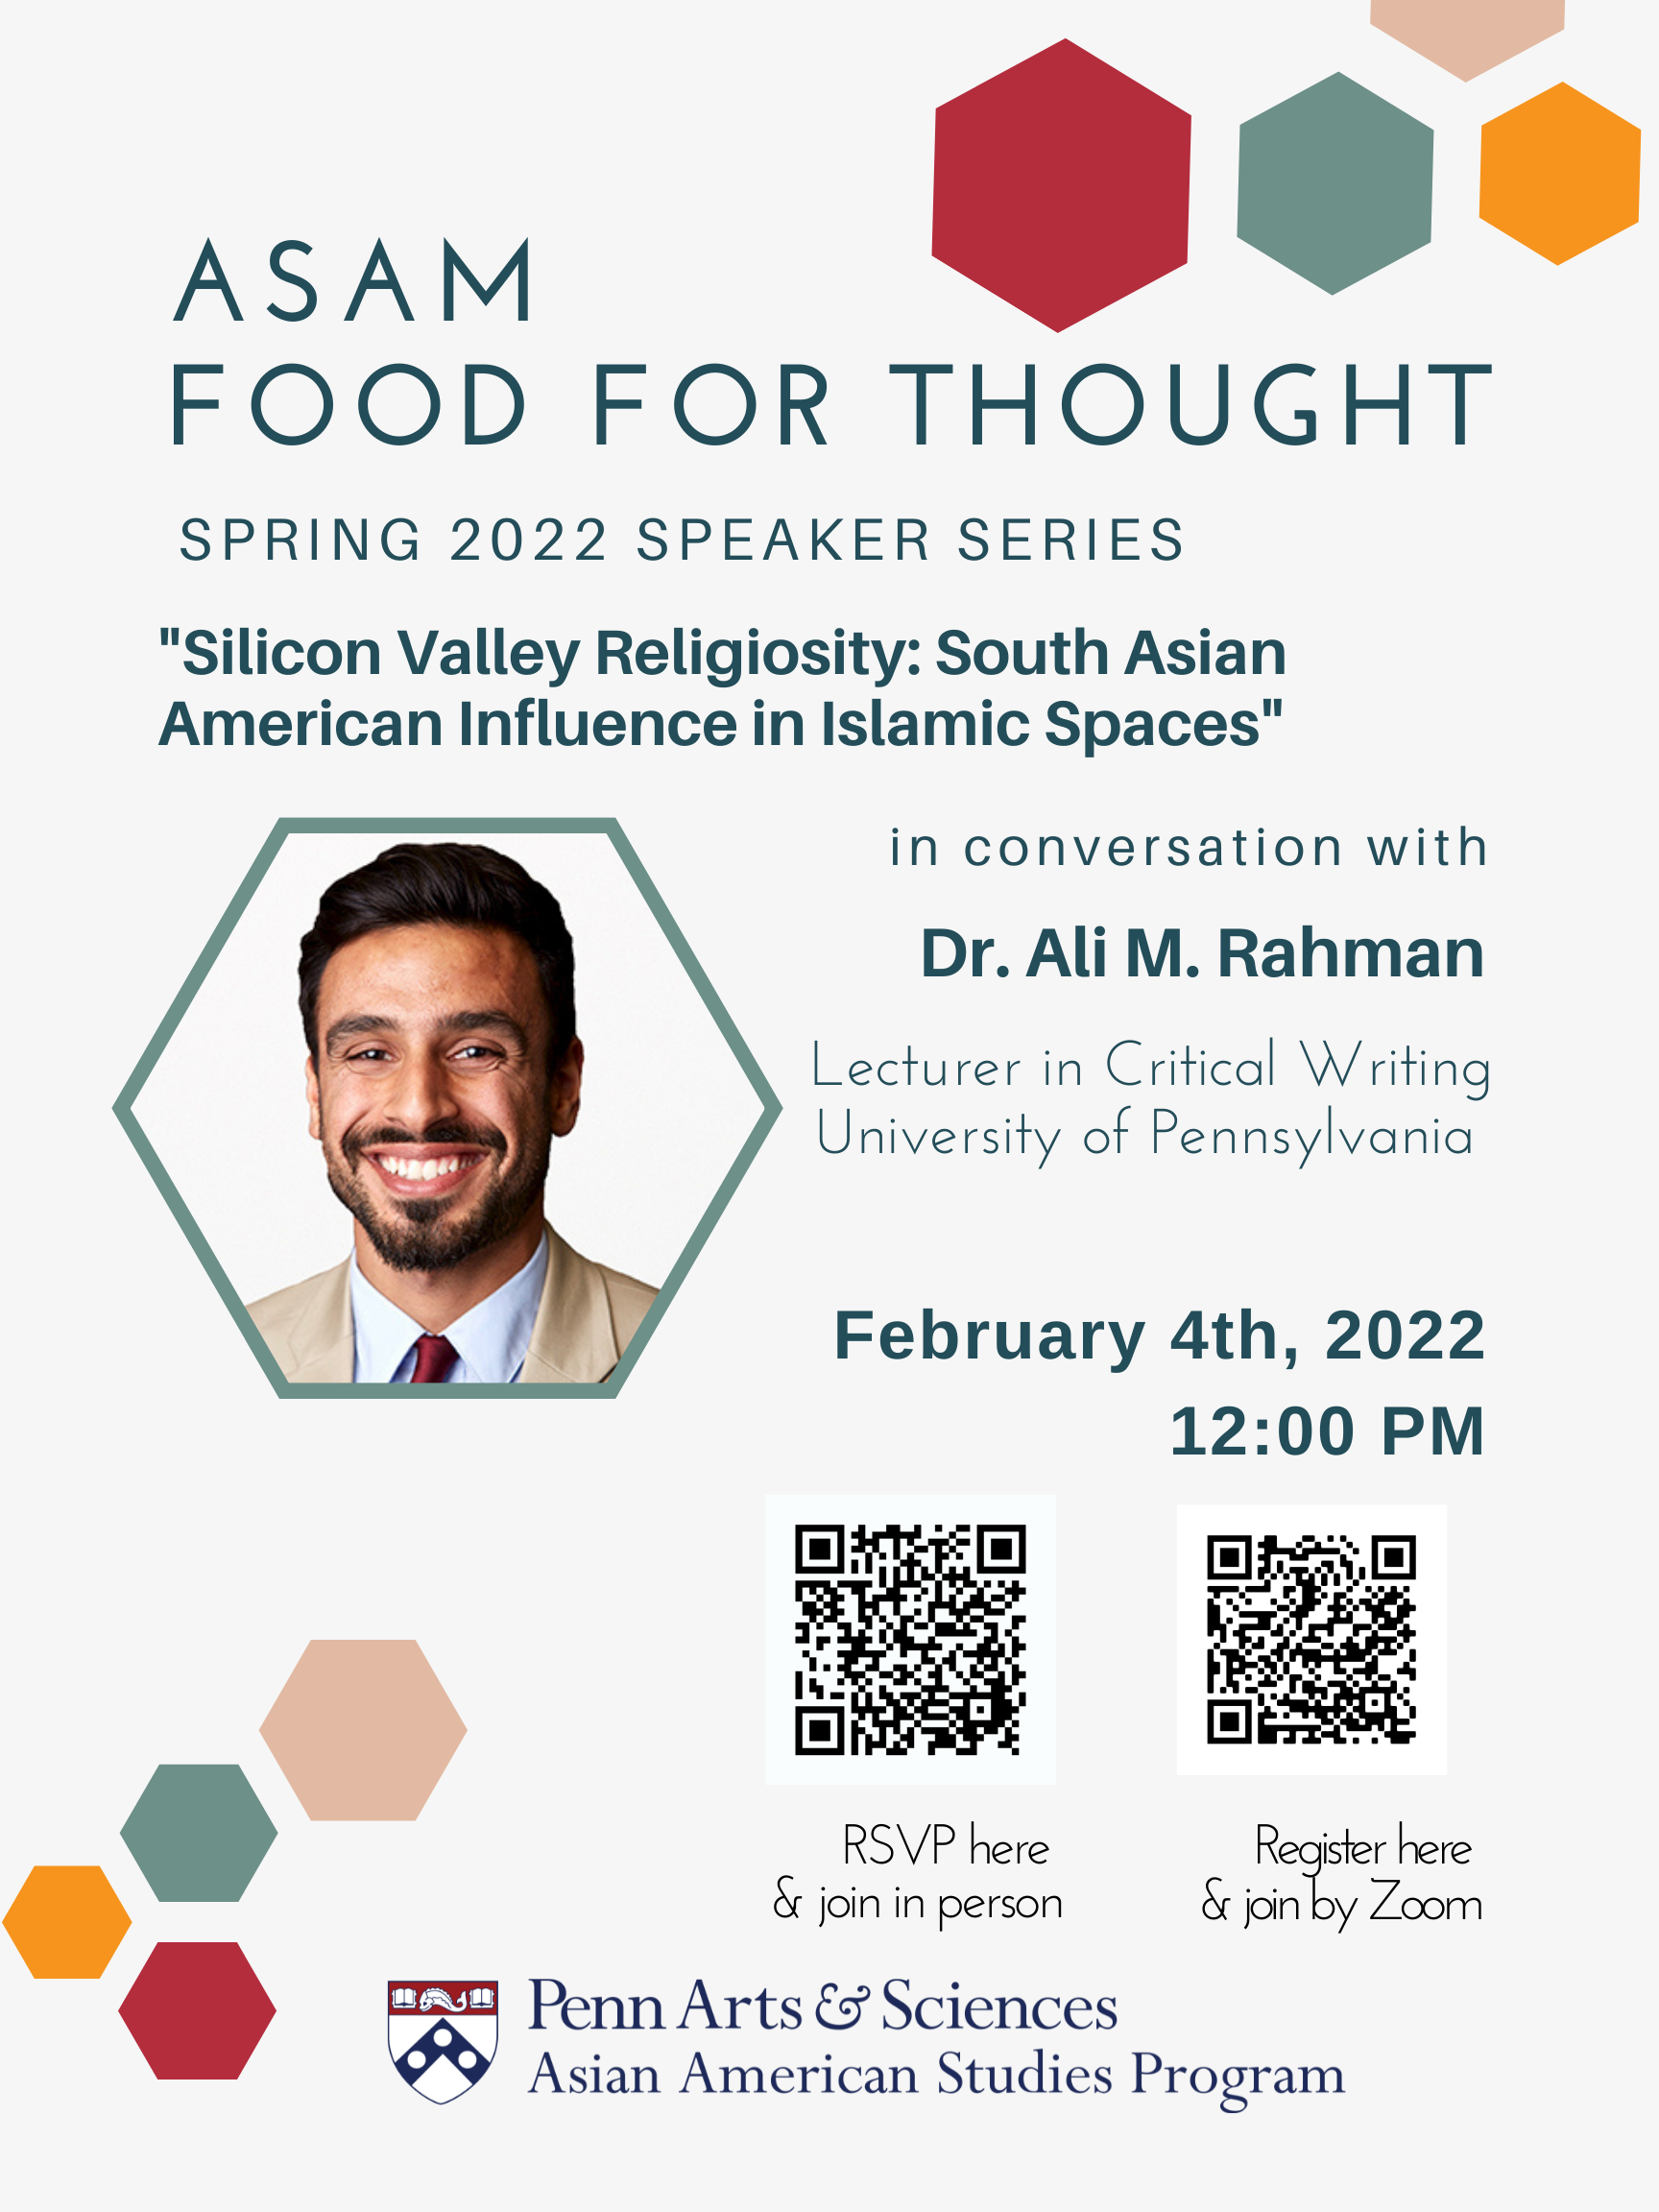 ASAM Food for Thought: “Silicon Valley Religiosity: South Asian American Influence in Islamic Spaces” in conversation with Dr. Ali M. Rahman, Lecturer in Critical Writing at Penn